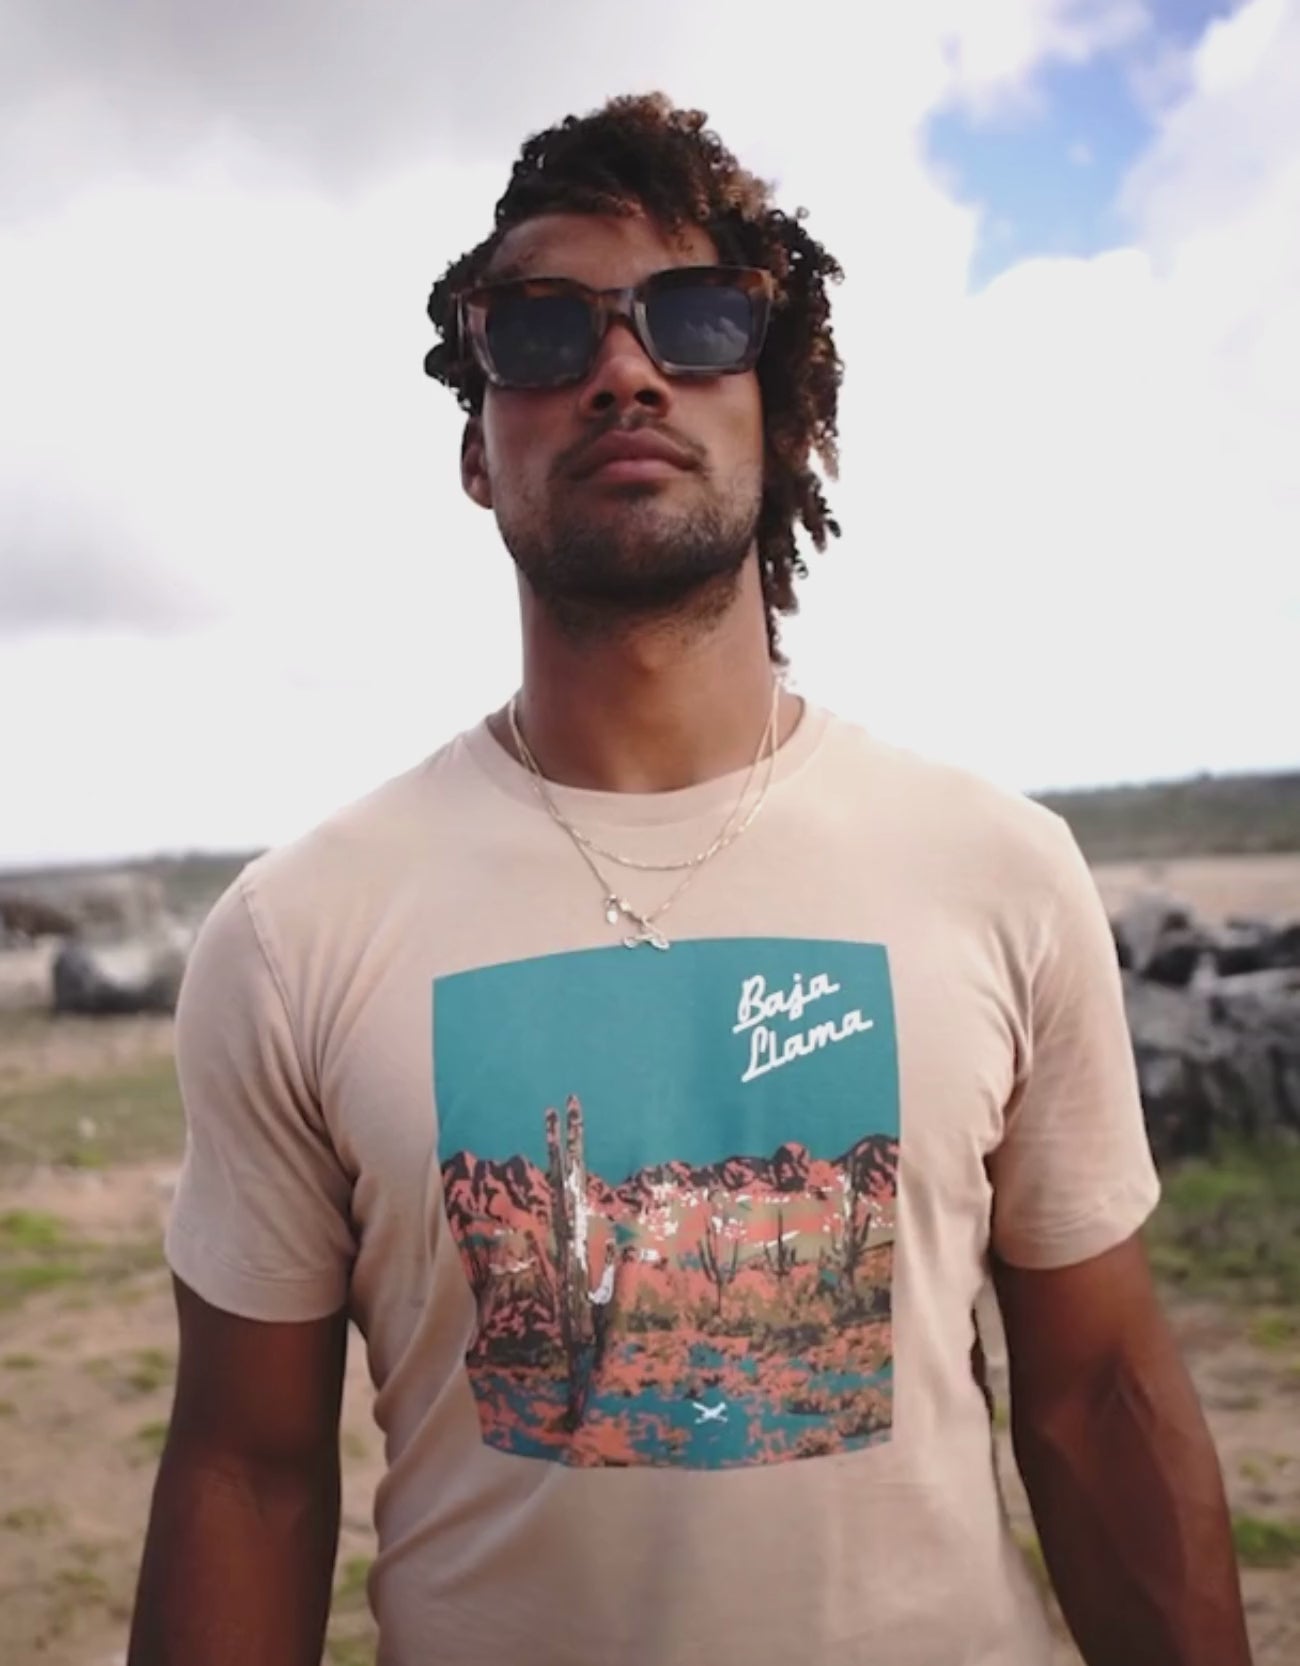 DESERT PERSPECTIVES - PRIMO GRAPHIC TEE